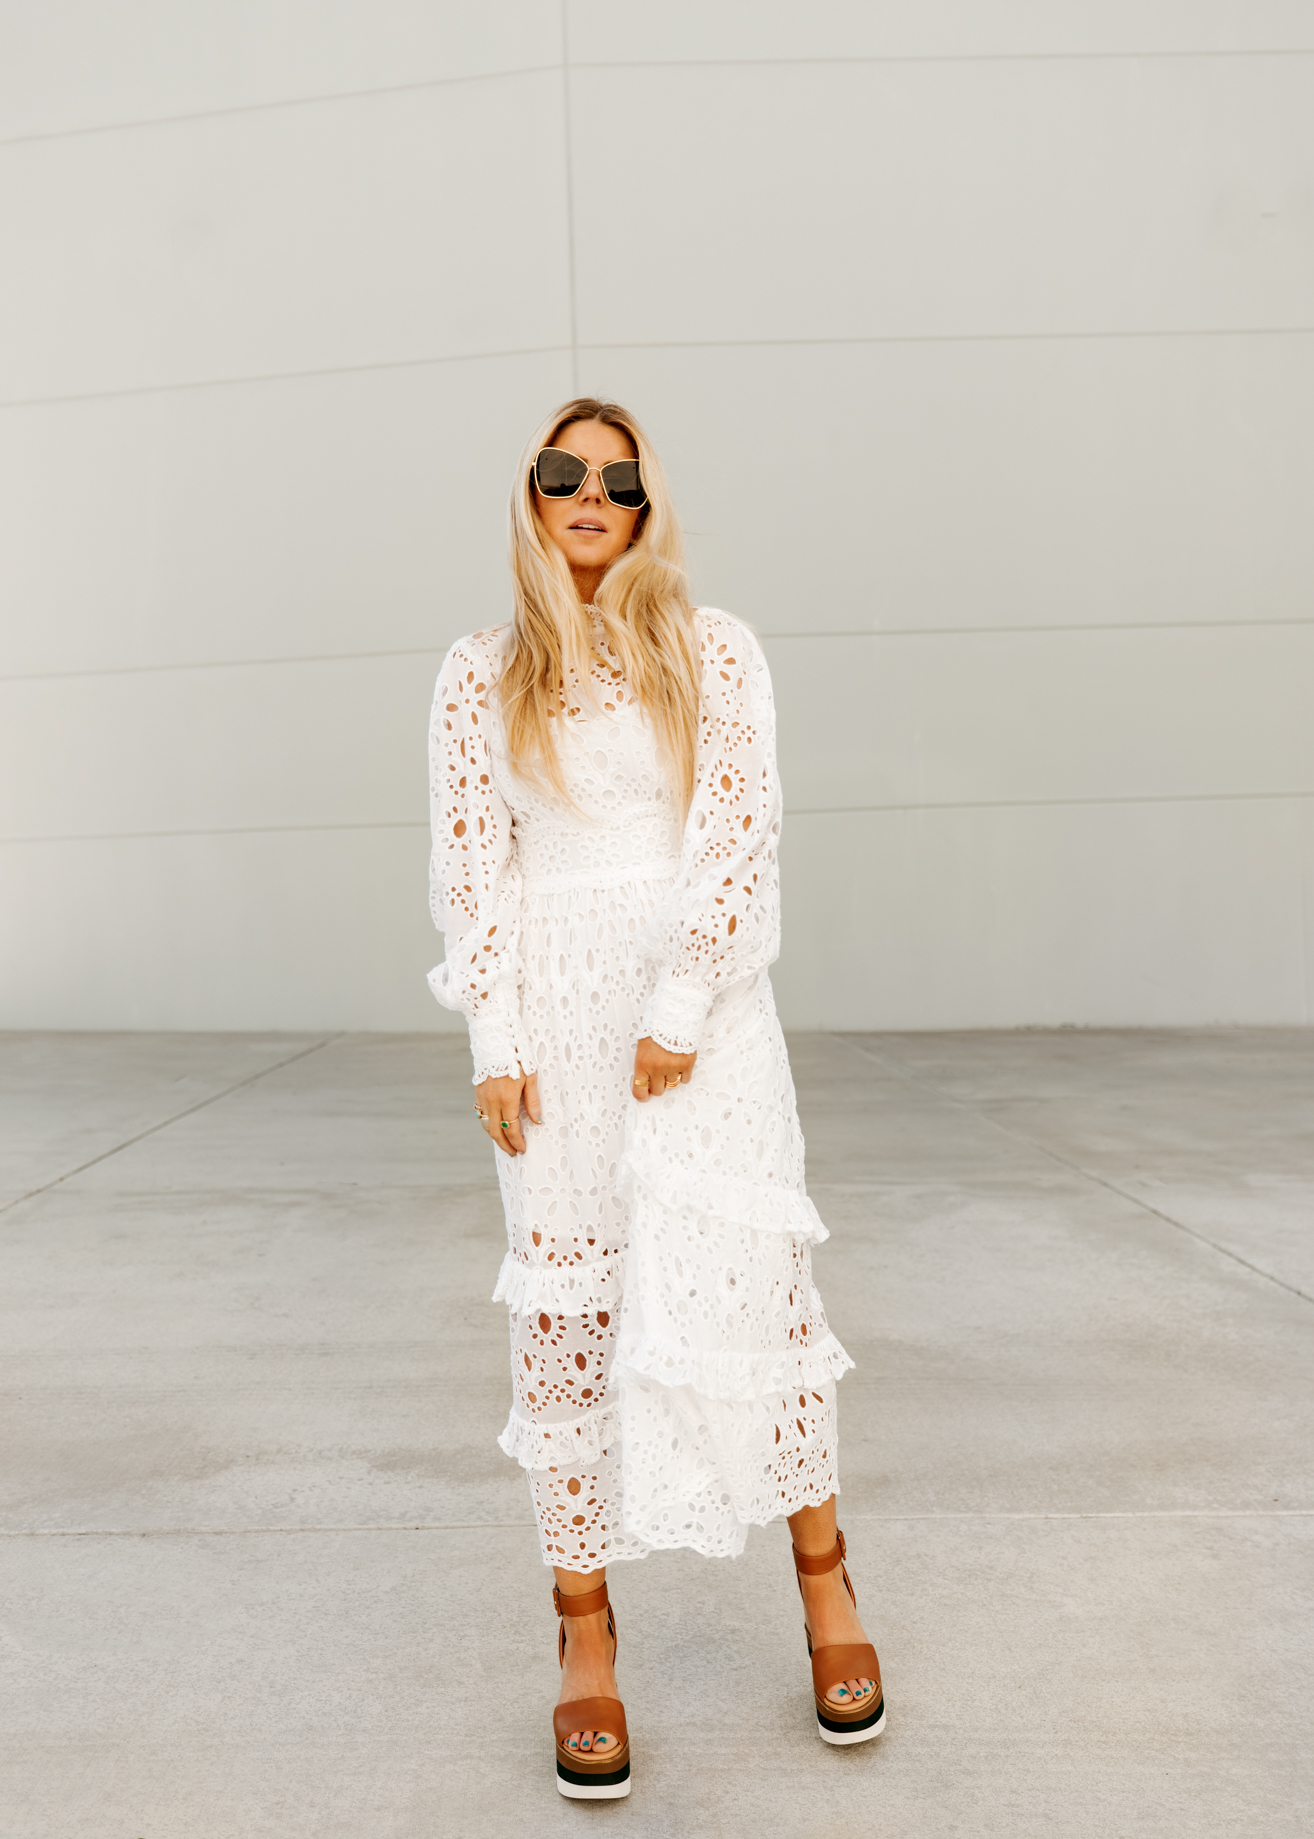 lisa allen of salty lashes wearing white eyelet for spring, platform sandals. and sunglasses